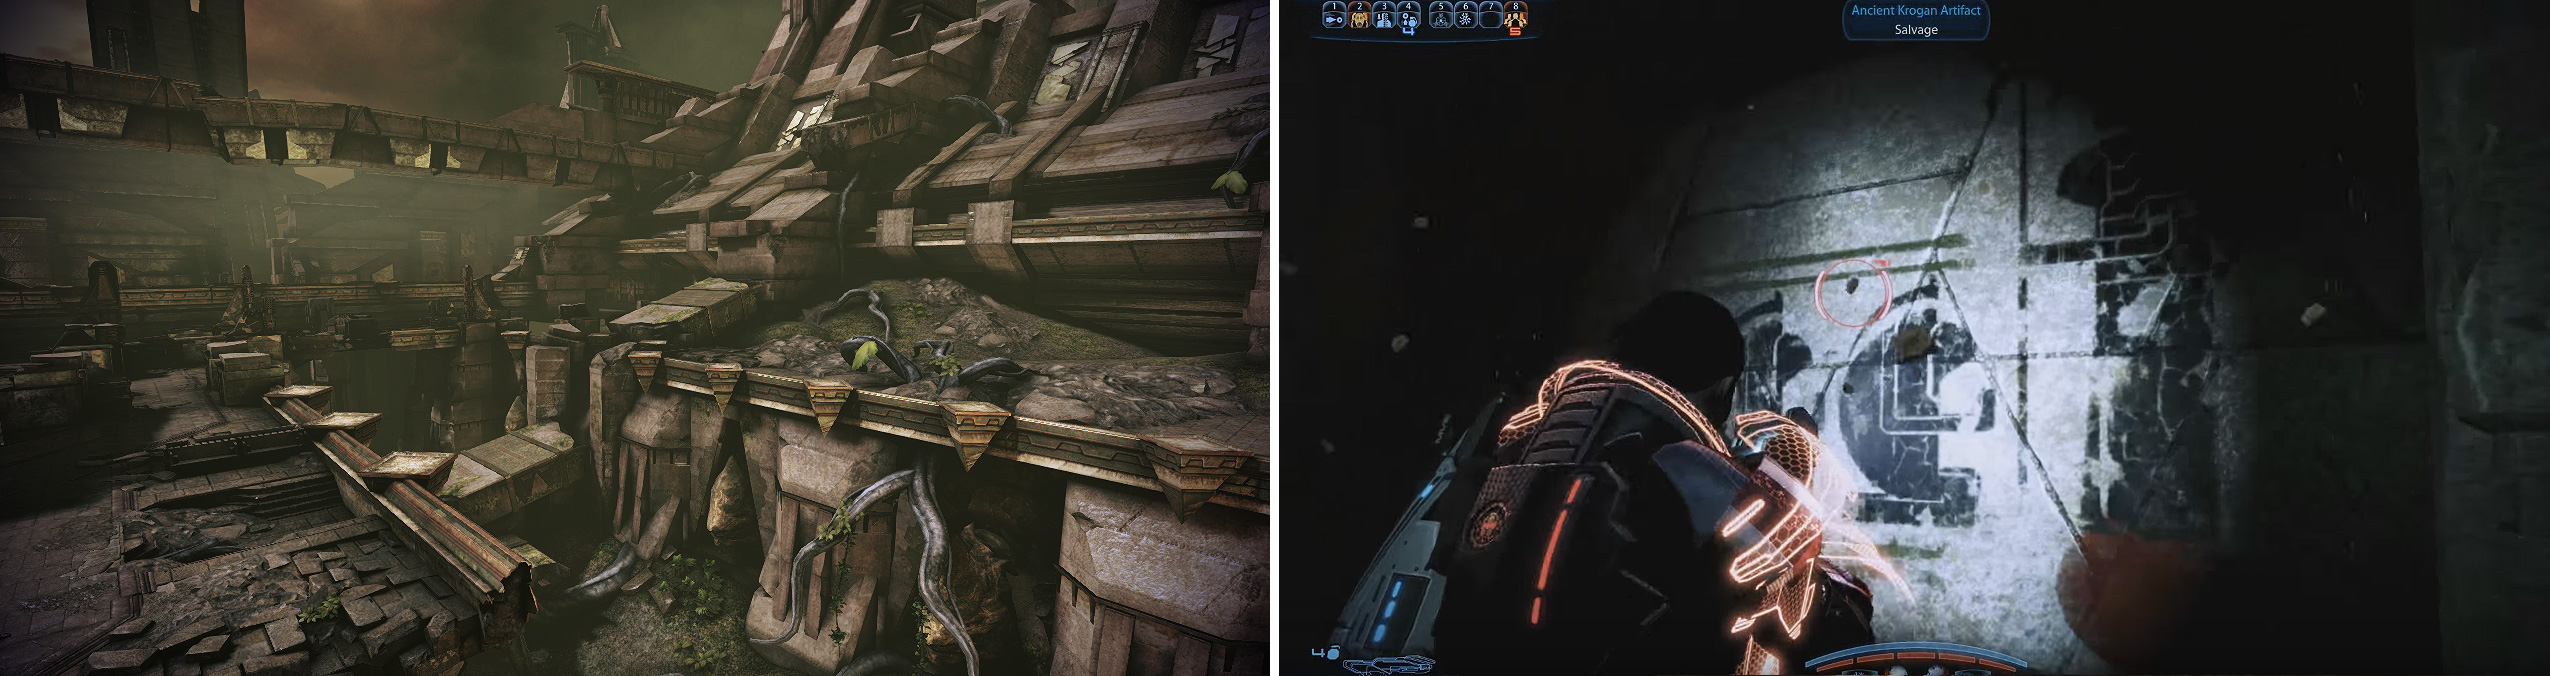 Tuchanka is a dying world filled with hostility. The perfect place for the Krogan (left). Beneath Tuchanka are catacombs filled with ancient Krogan murals (right).